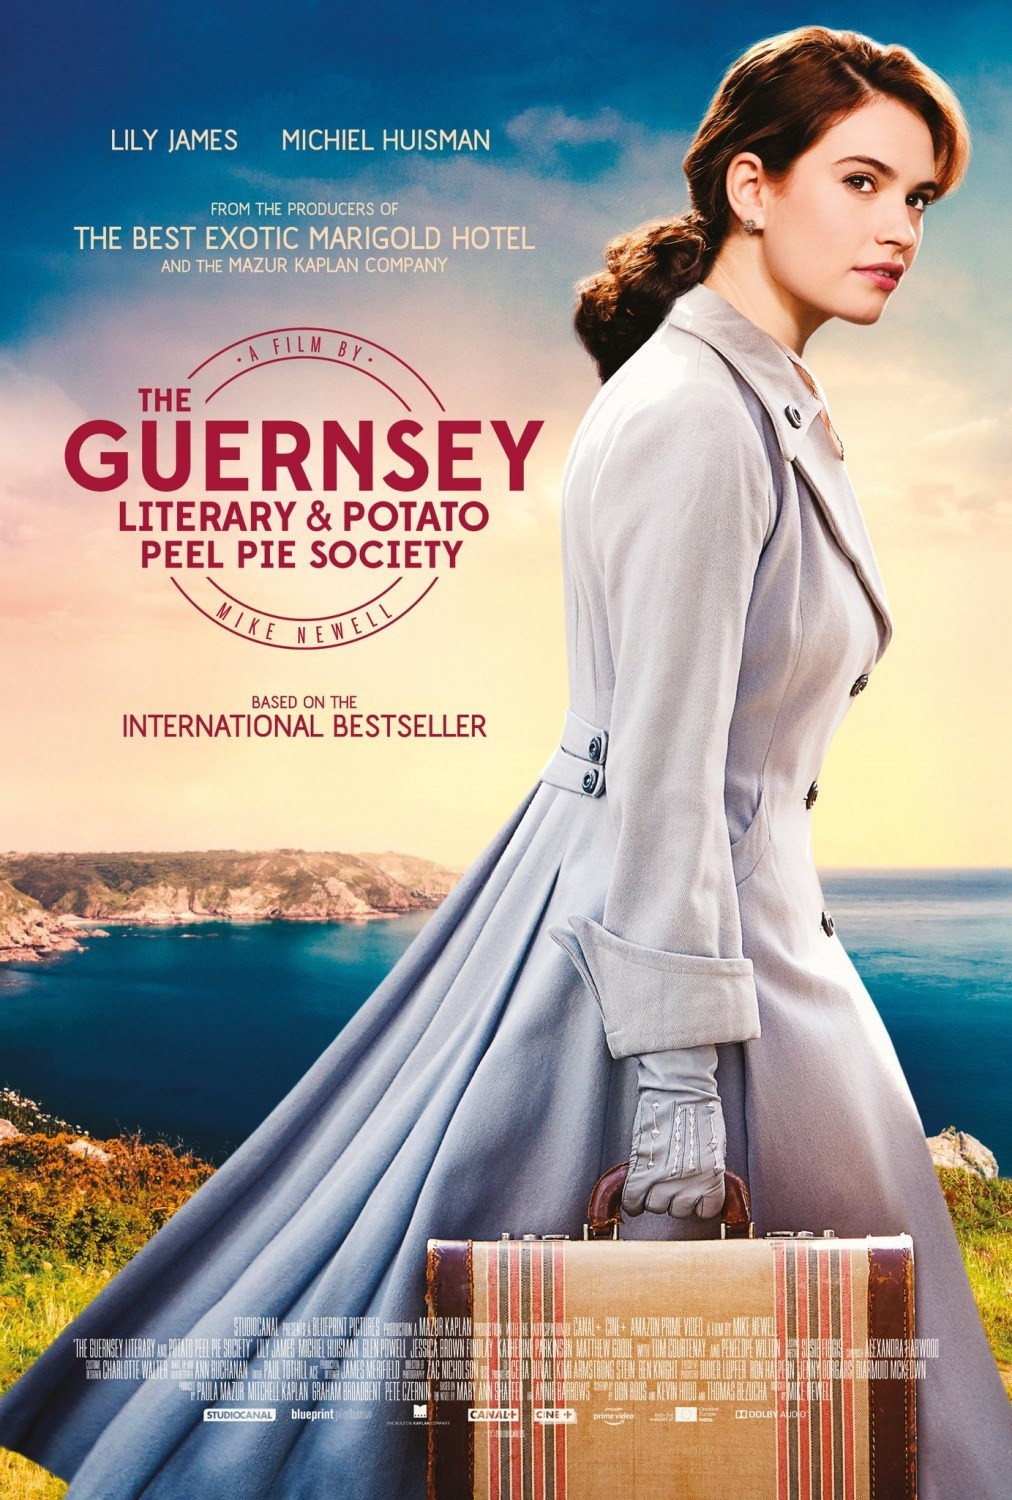 The Guernsey Literary And Potato Peel Pie Society Cast
 The Guernsey Literary and Potato Peel Pie Society Teaser